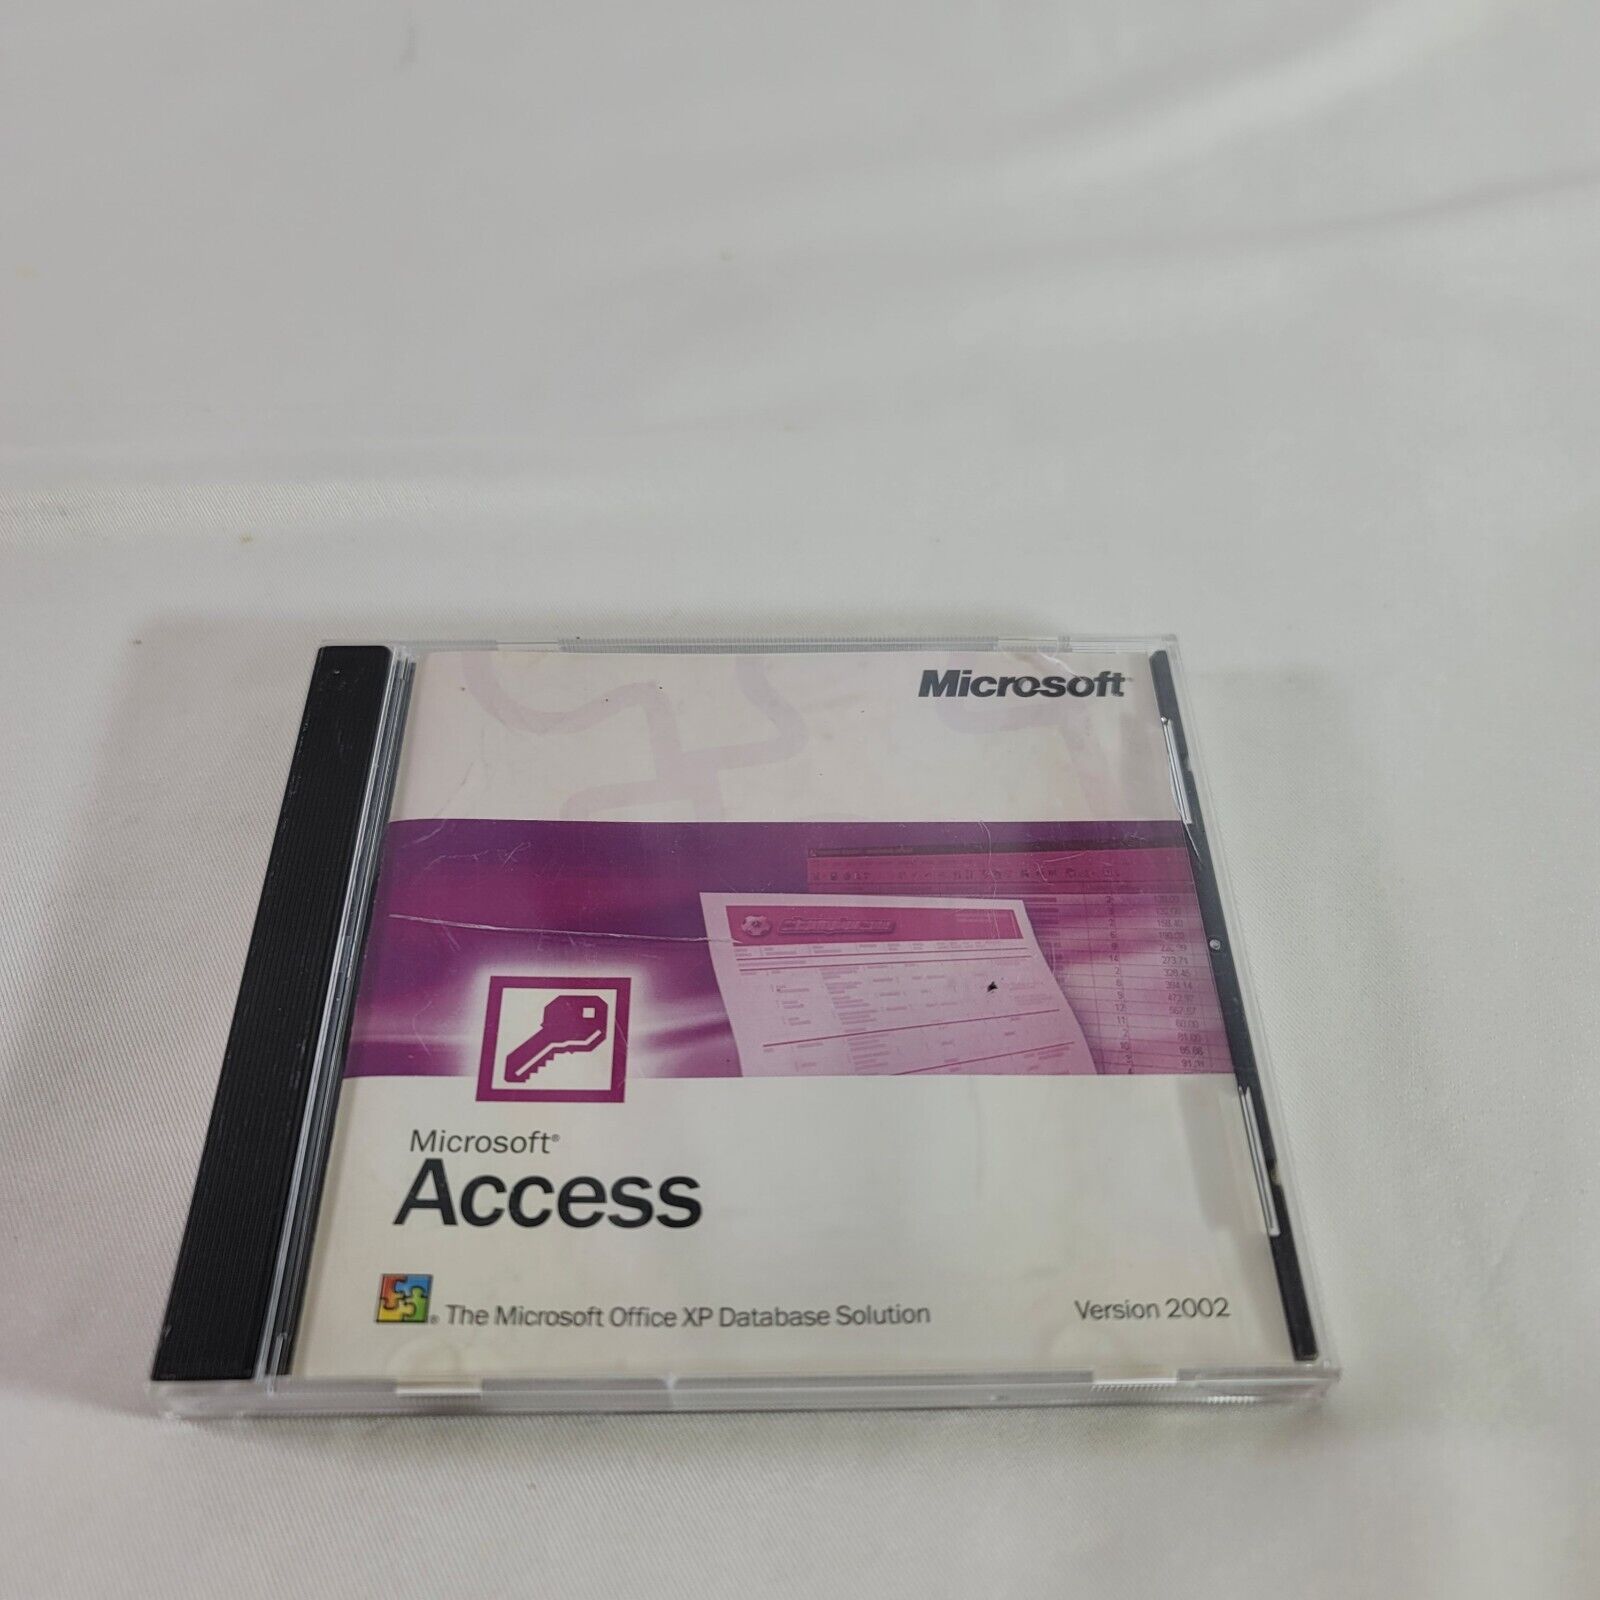 Microsoft Access 2002 Upgrade - Office XP Database Solution w/product key